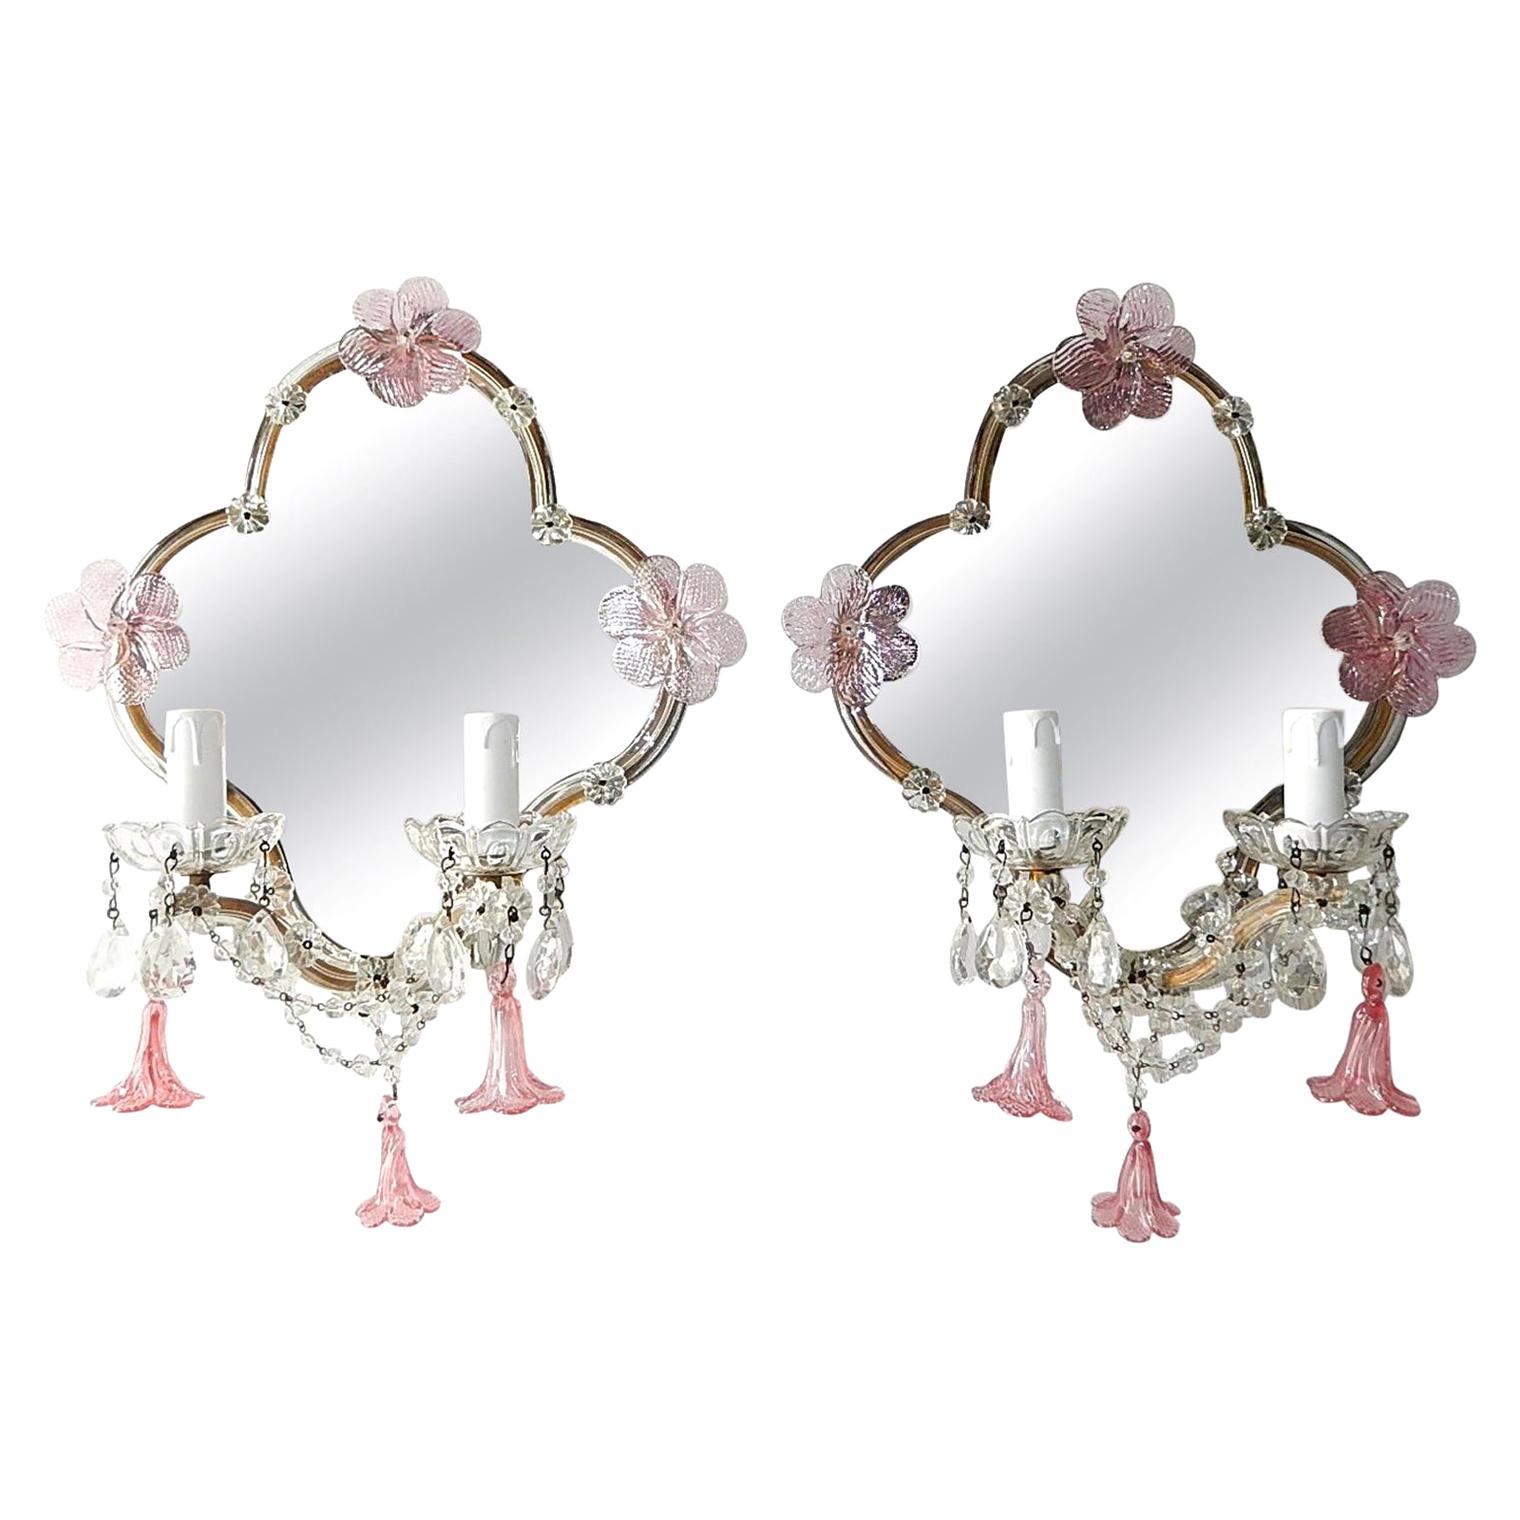 Huge Maison Baguès Style Mirror with Pink Murano Flowers Sconces